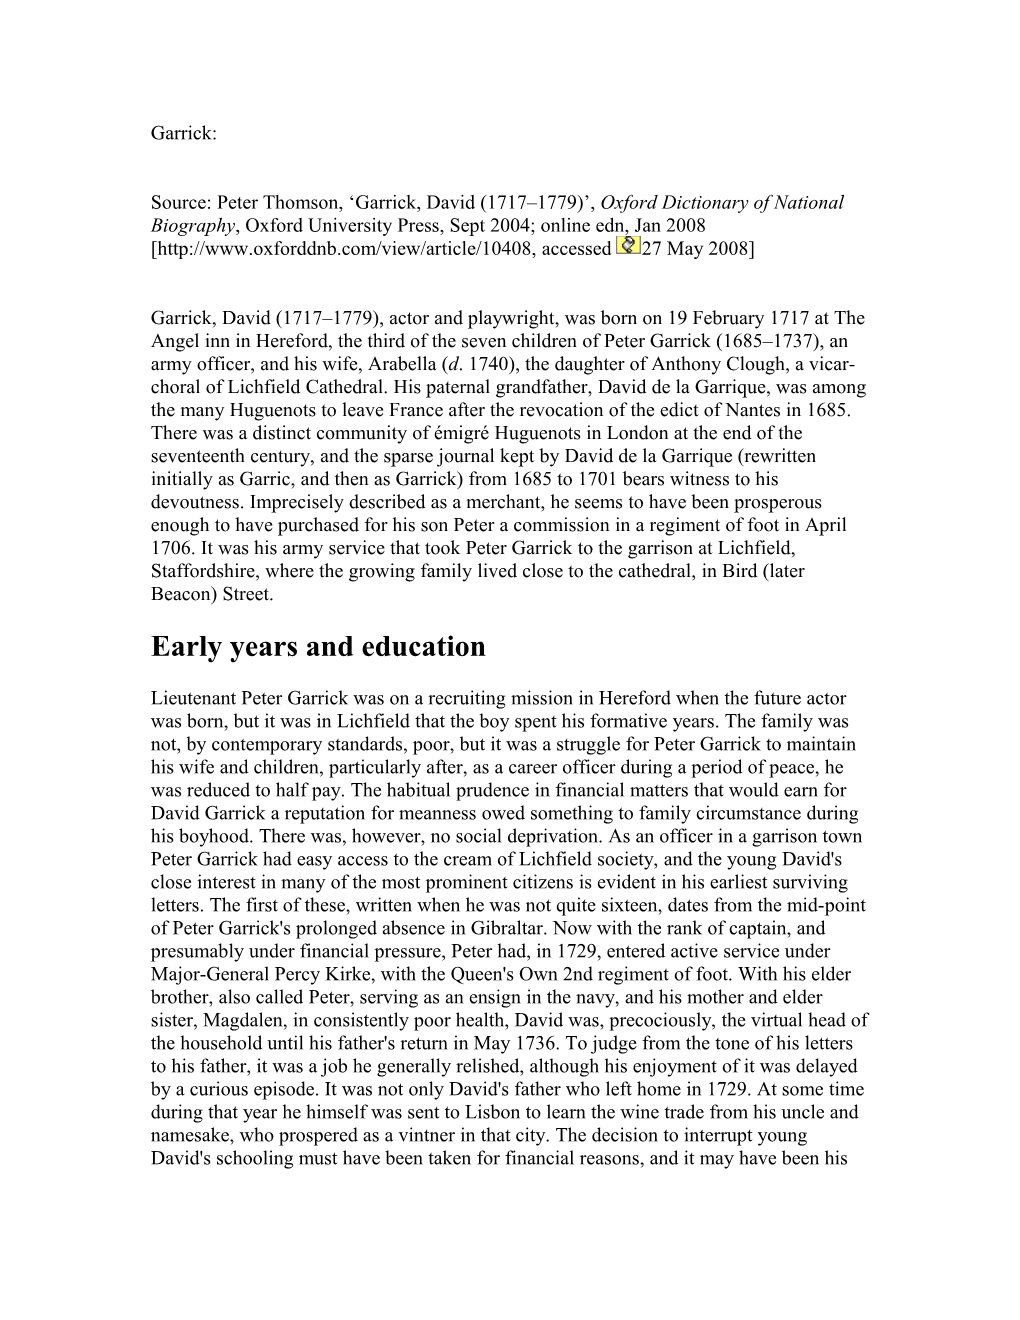 Early Years and Education s1